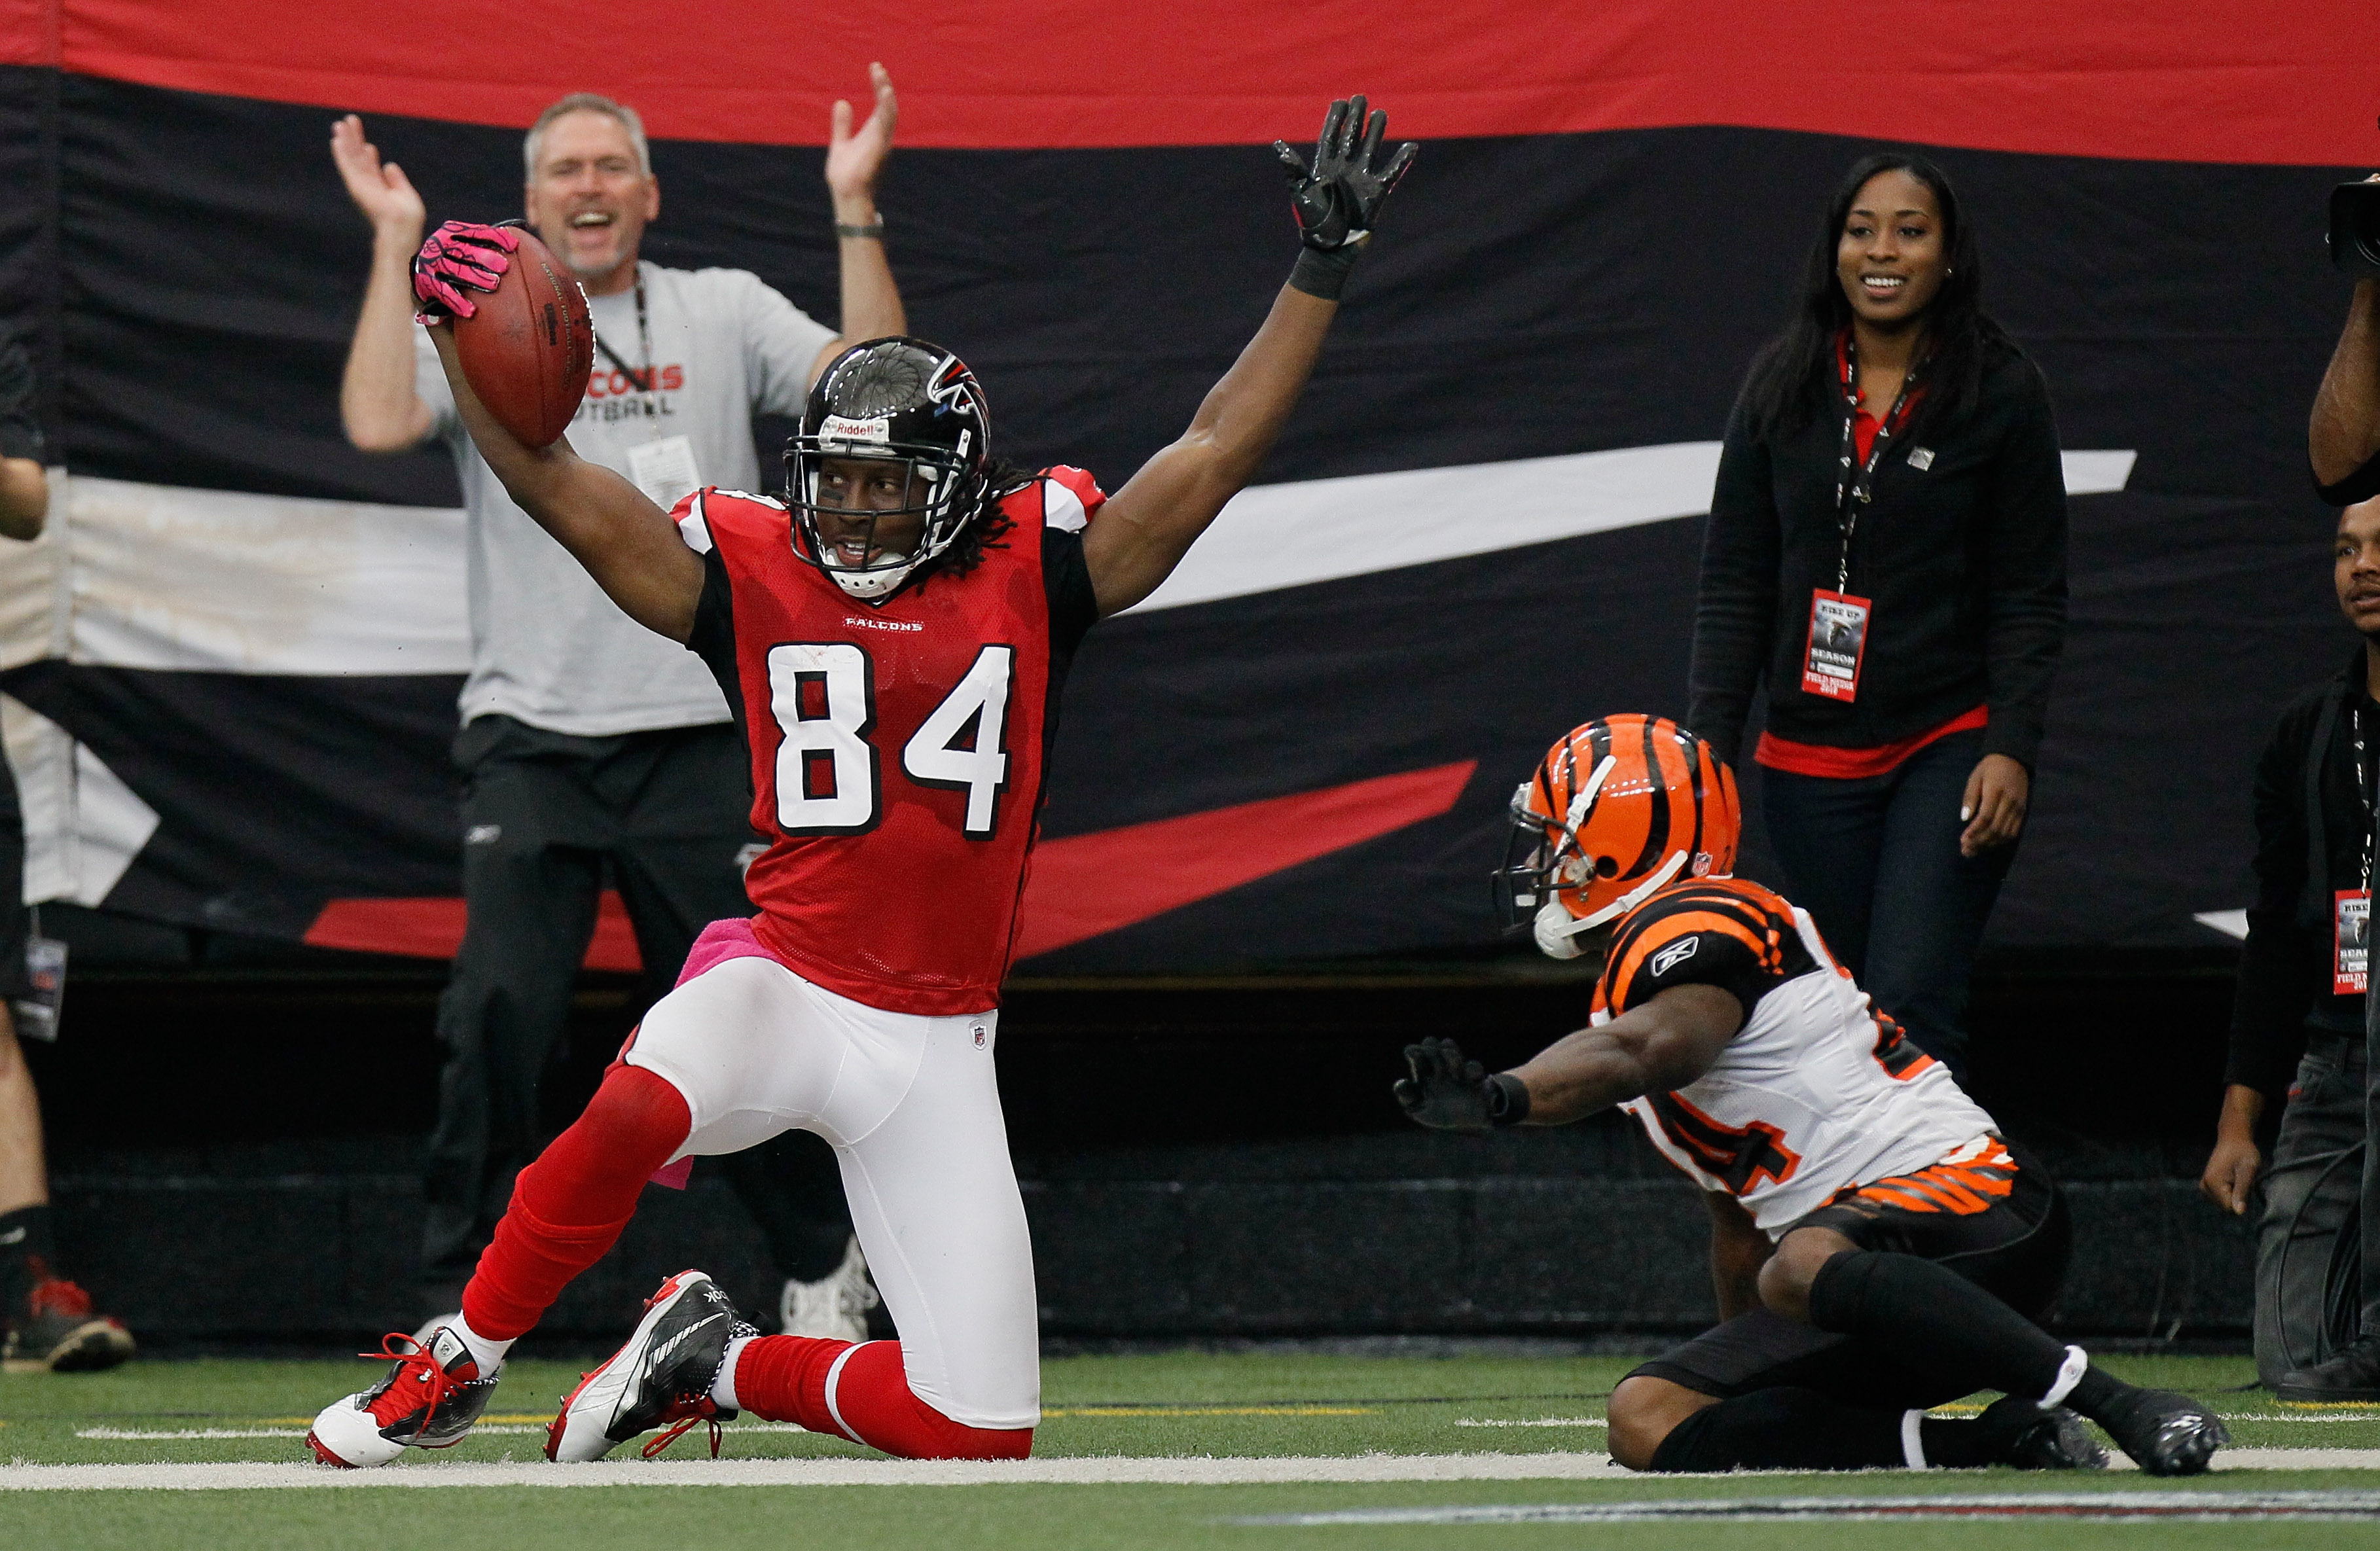 Atlanta Falcons release all-time leading receiver Roddy White, NFL News